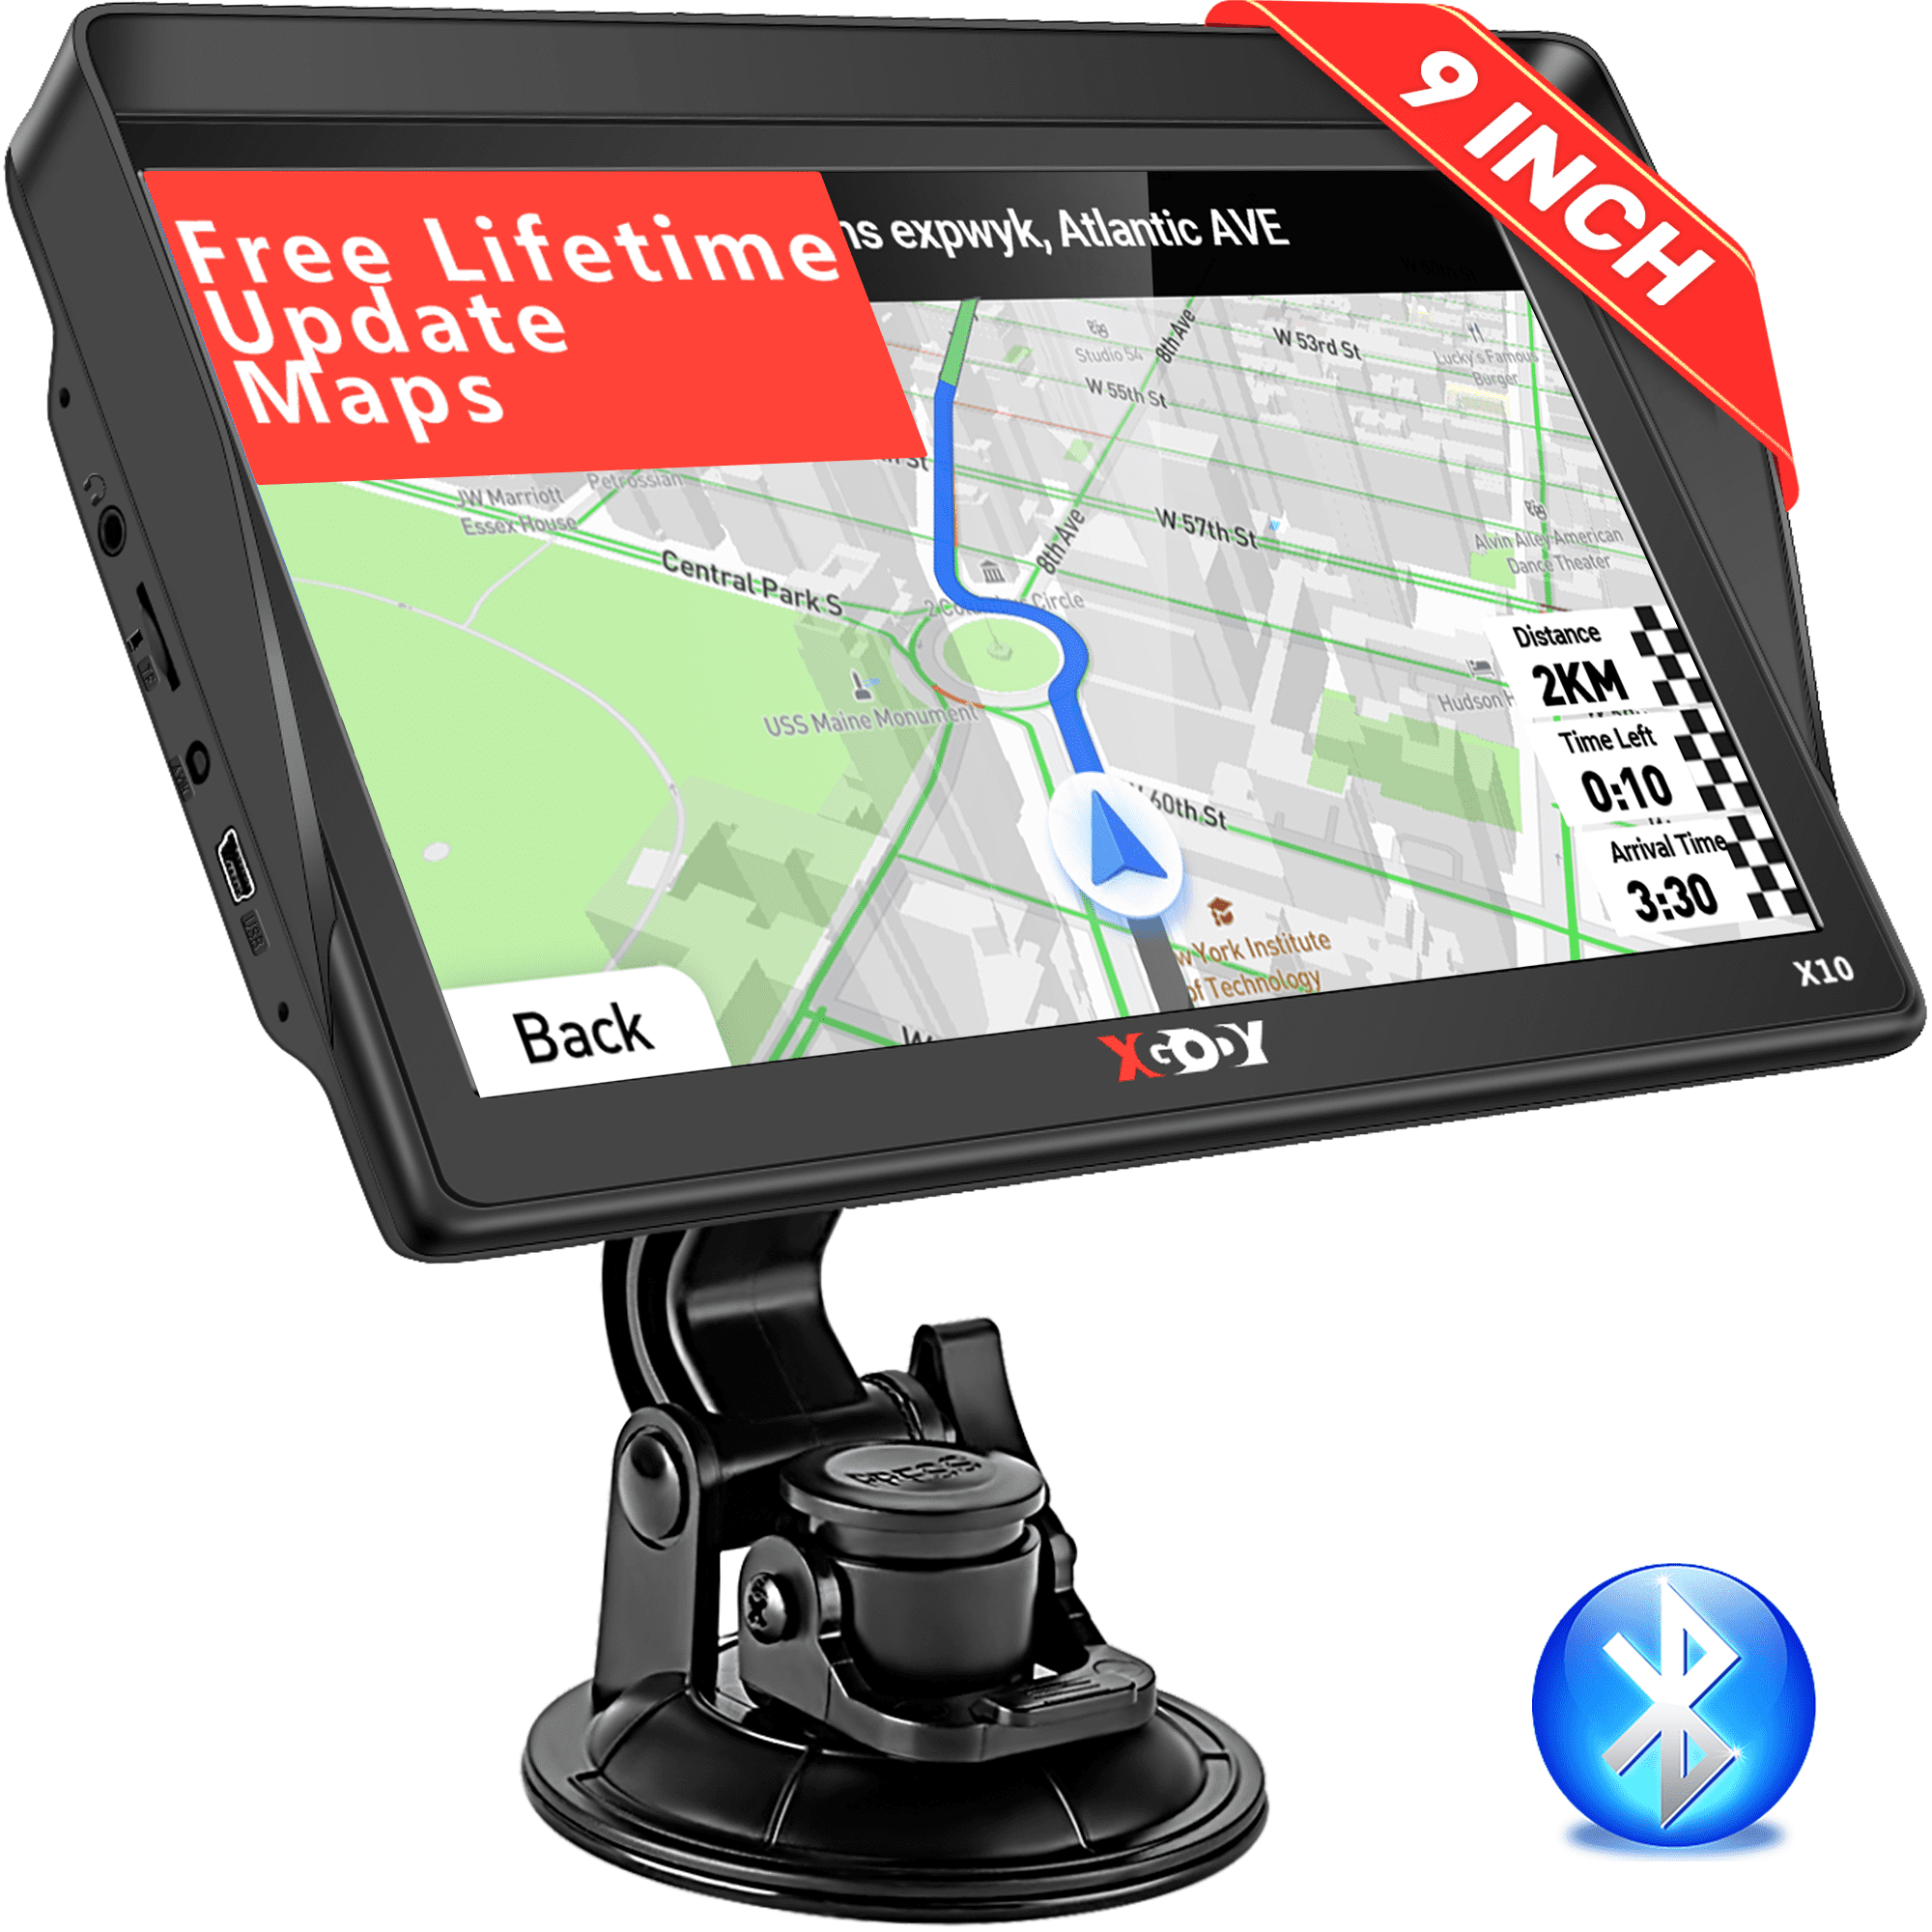 Xgody Bluetooth Truck GPS 9 inch Big Screen GPS Navigation for Car with Voice Command,3D & 2D Maps,Free Lifetime Map Update, Size: Normal, Black